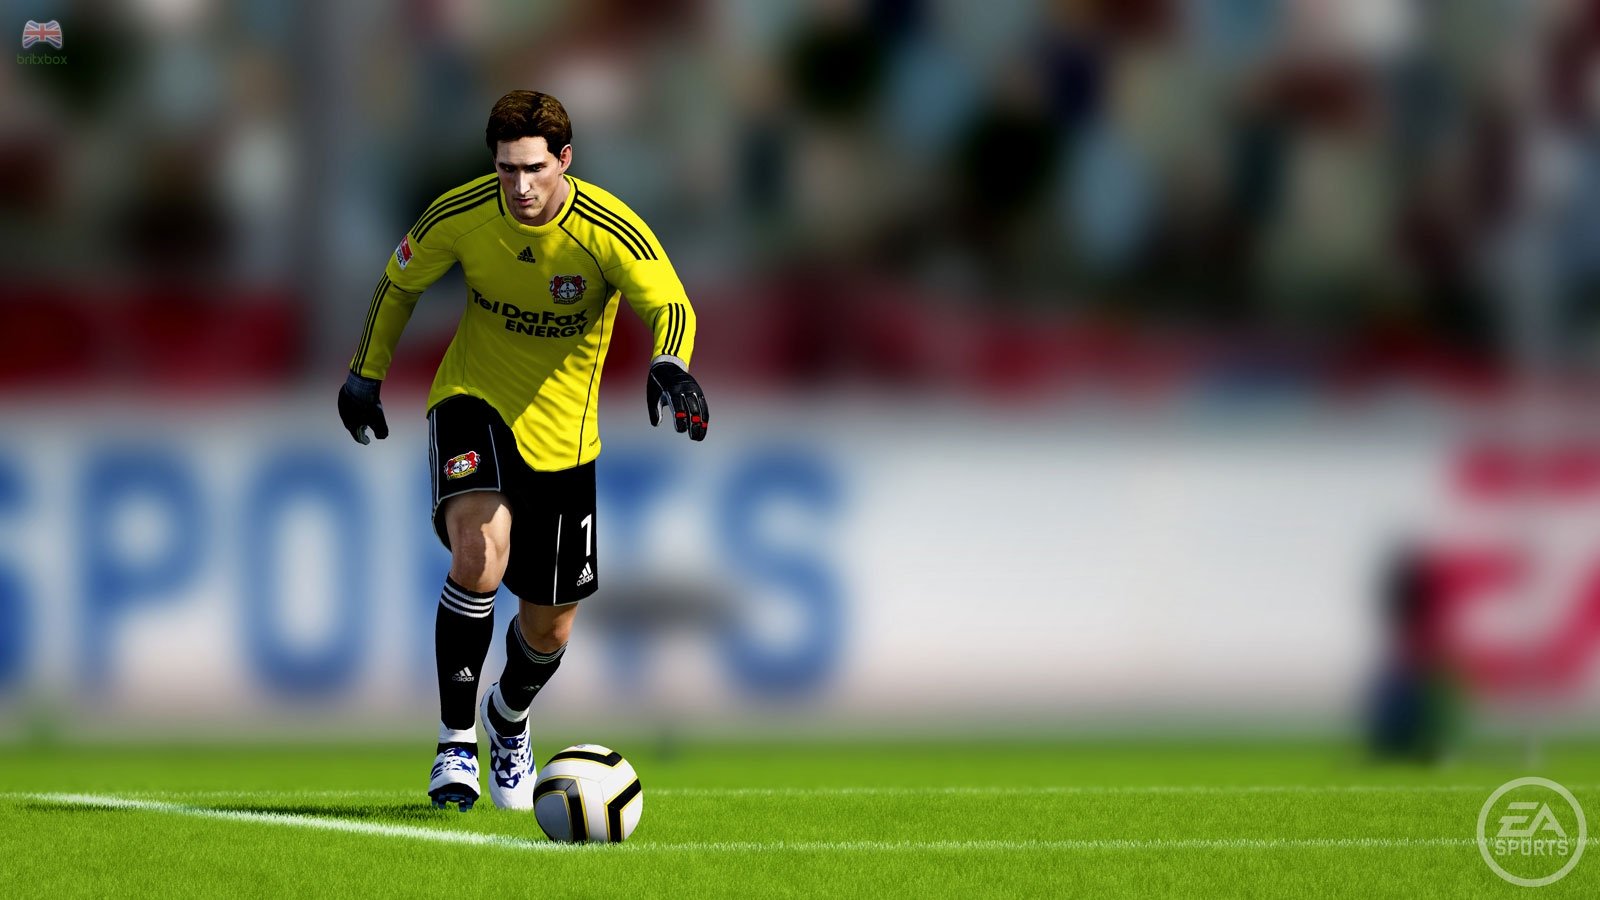 Here's what you need to know about the FIFA 15 release date.